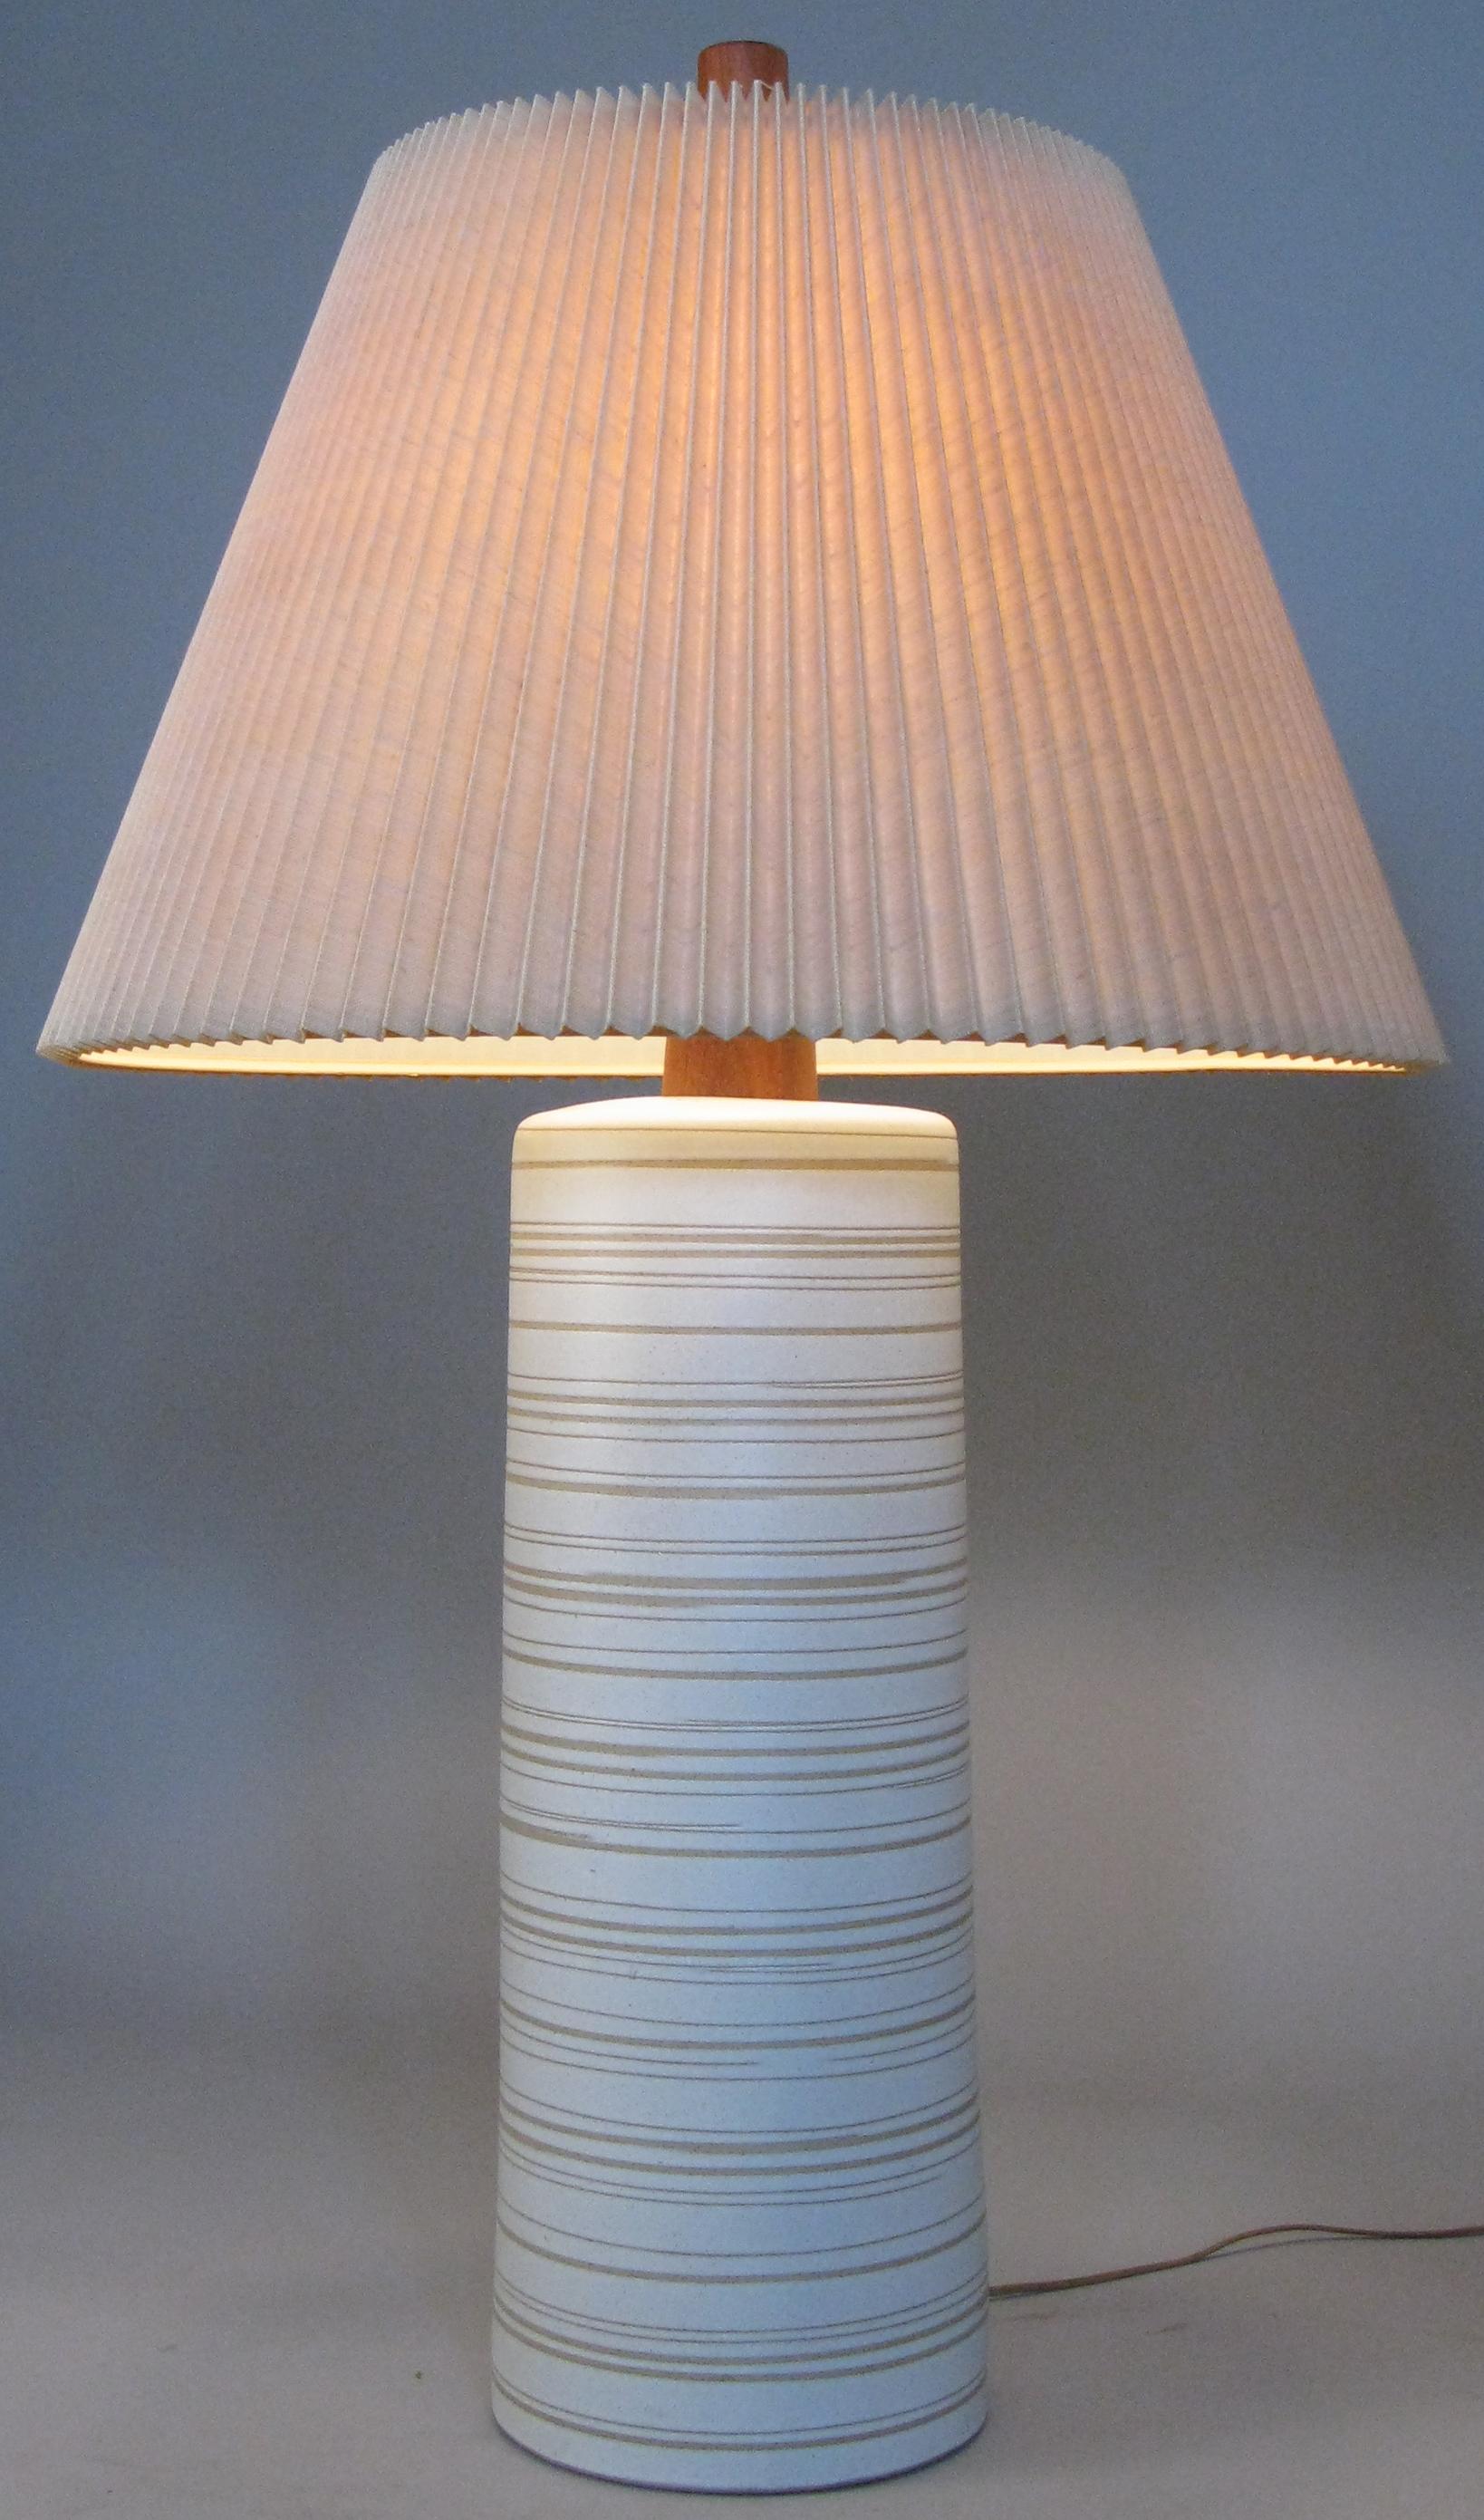 A very large vintage 1960s glazed ceramic table lamp by Gordon Martz for Marshall Studios, with a walnut neck and the original walnut finial. The lamp is off white with grey and taupe colored details. The linen pleated shade may also be original to